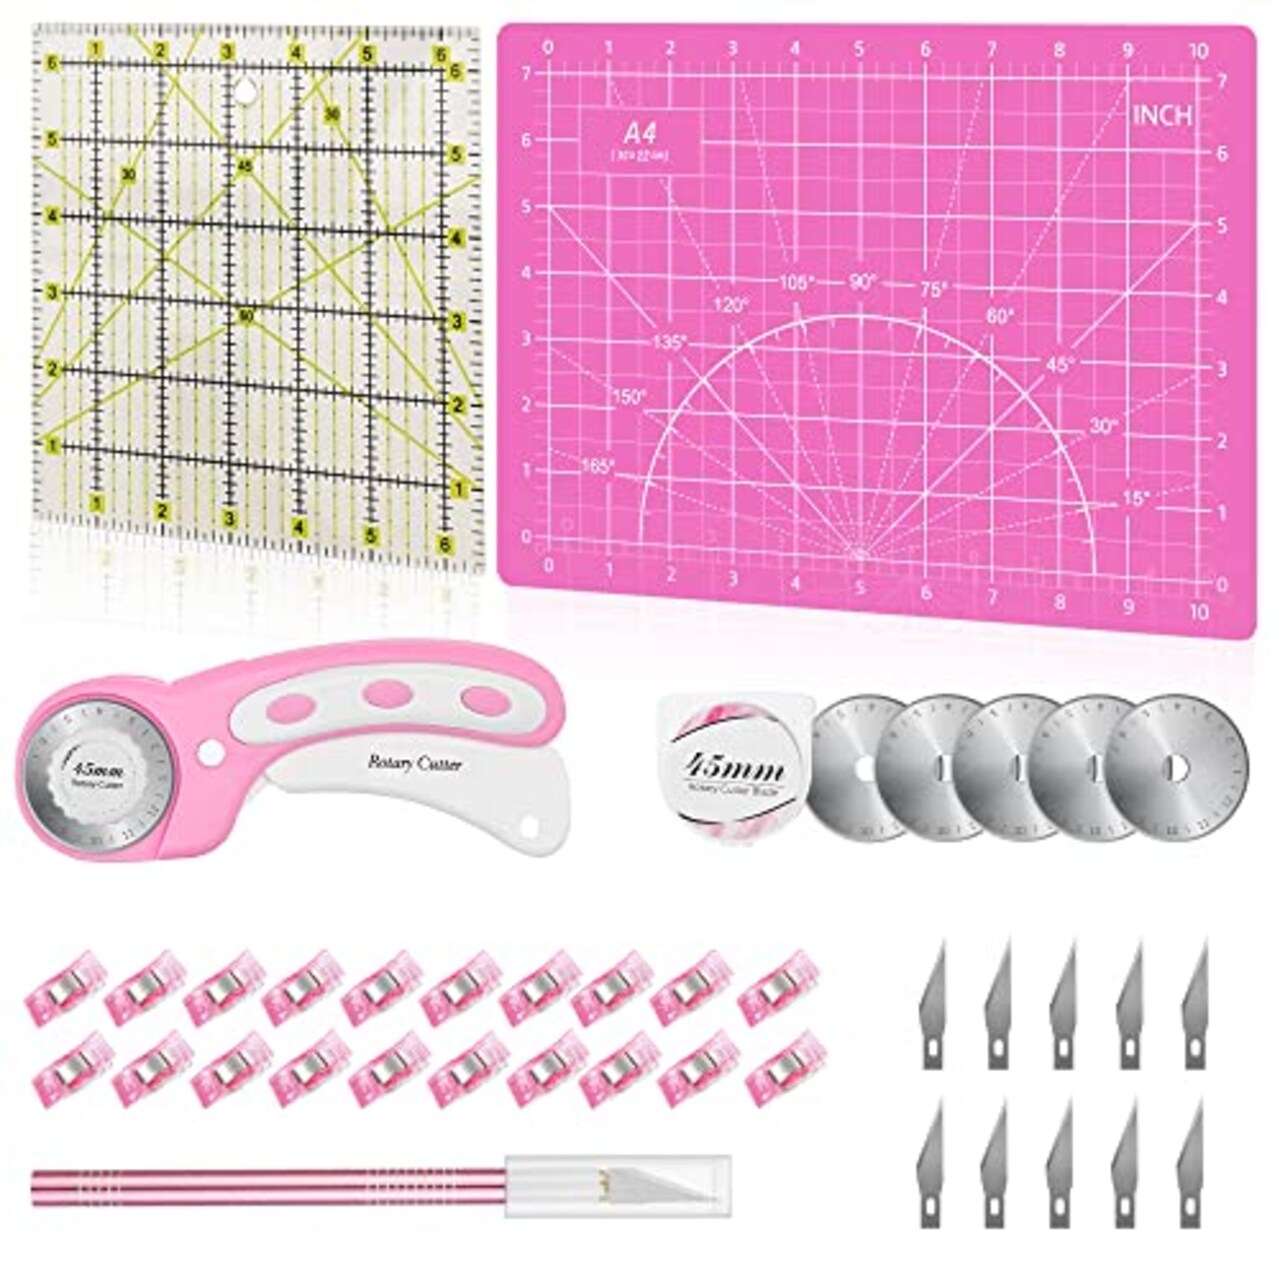 39 Pcs Rotary Cutter Set Pink - Quilting Kit incl. 45mm Fabric Cutter with  5 Extra Blades, A4 Cutting Mat, Craft Knife Set, Quilting Ruler and Sewing  Clips, Ideal for Crafting, Sewing, Patchworking